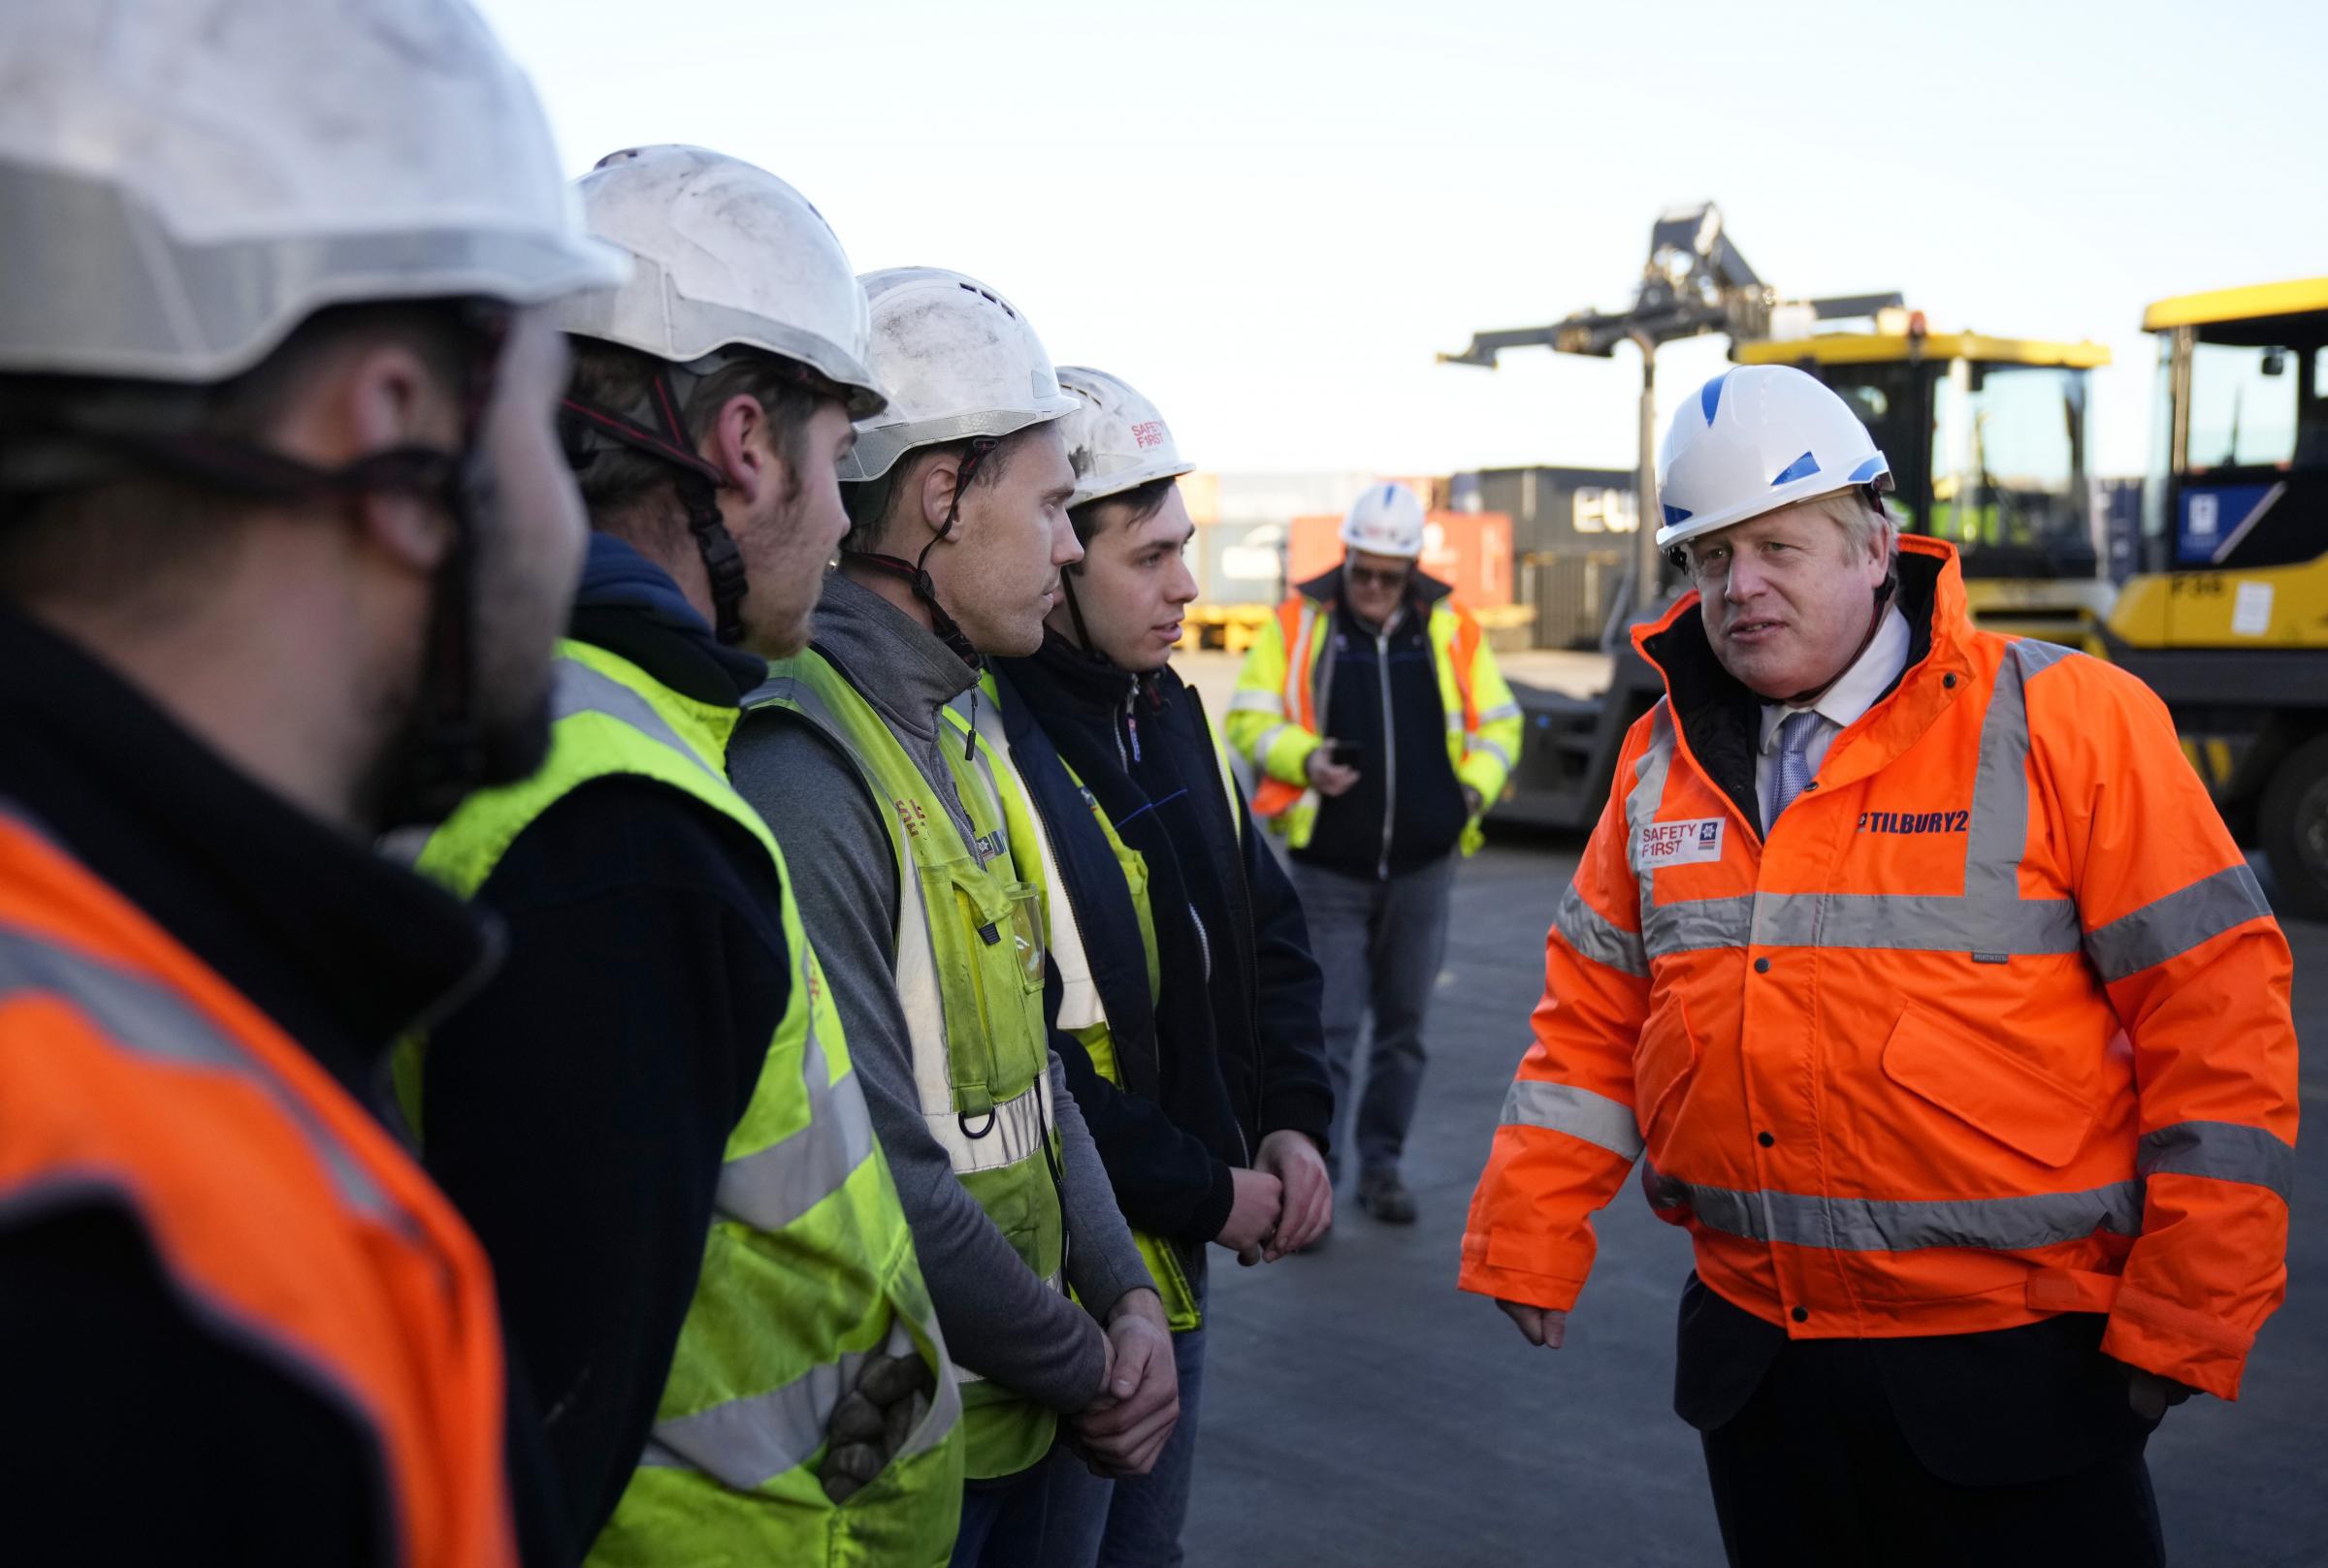 Prime Minister Boris Johnson speaks with workers during a visit to Tilbury Docks in Essex. Picture date: Monday January 31, 2022.